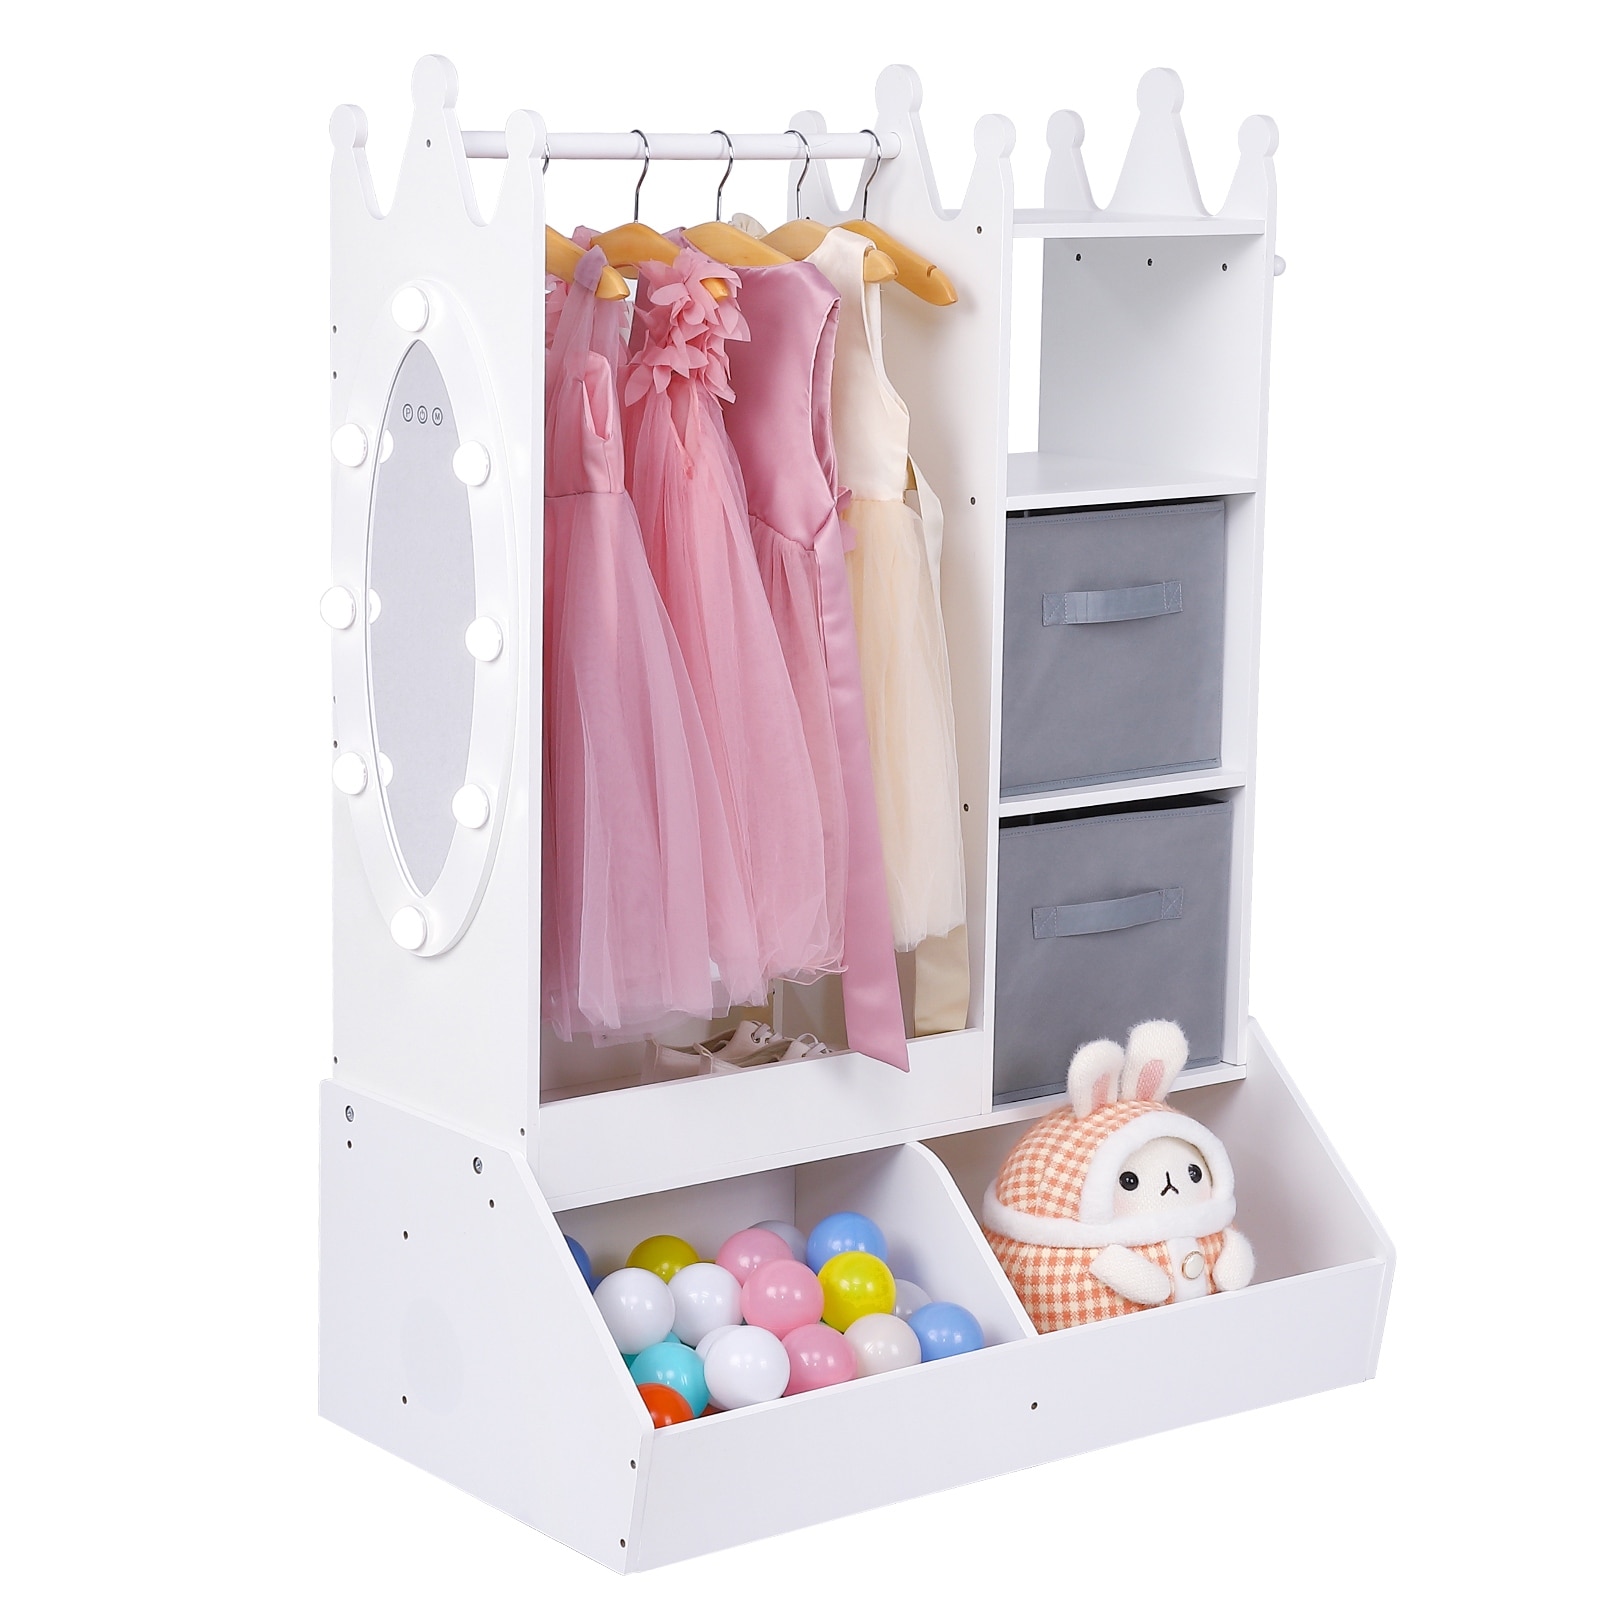 https://ak1.ostkcdn.com/images/products/is/images/direct/b8763721500d02a955944a7b931aa931c483b0c8/Girls%27-Dress-Up-Storage-with-Light-%26-Mirror%2CKids-Clothing-Rack%2C-Storage-Bin%2C-and-Hanging-Armoire-Closet.jpg